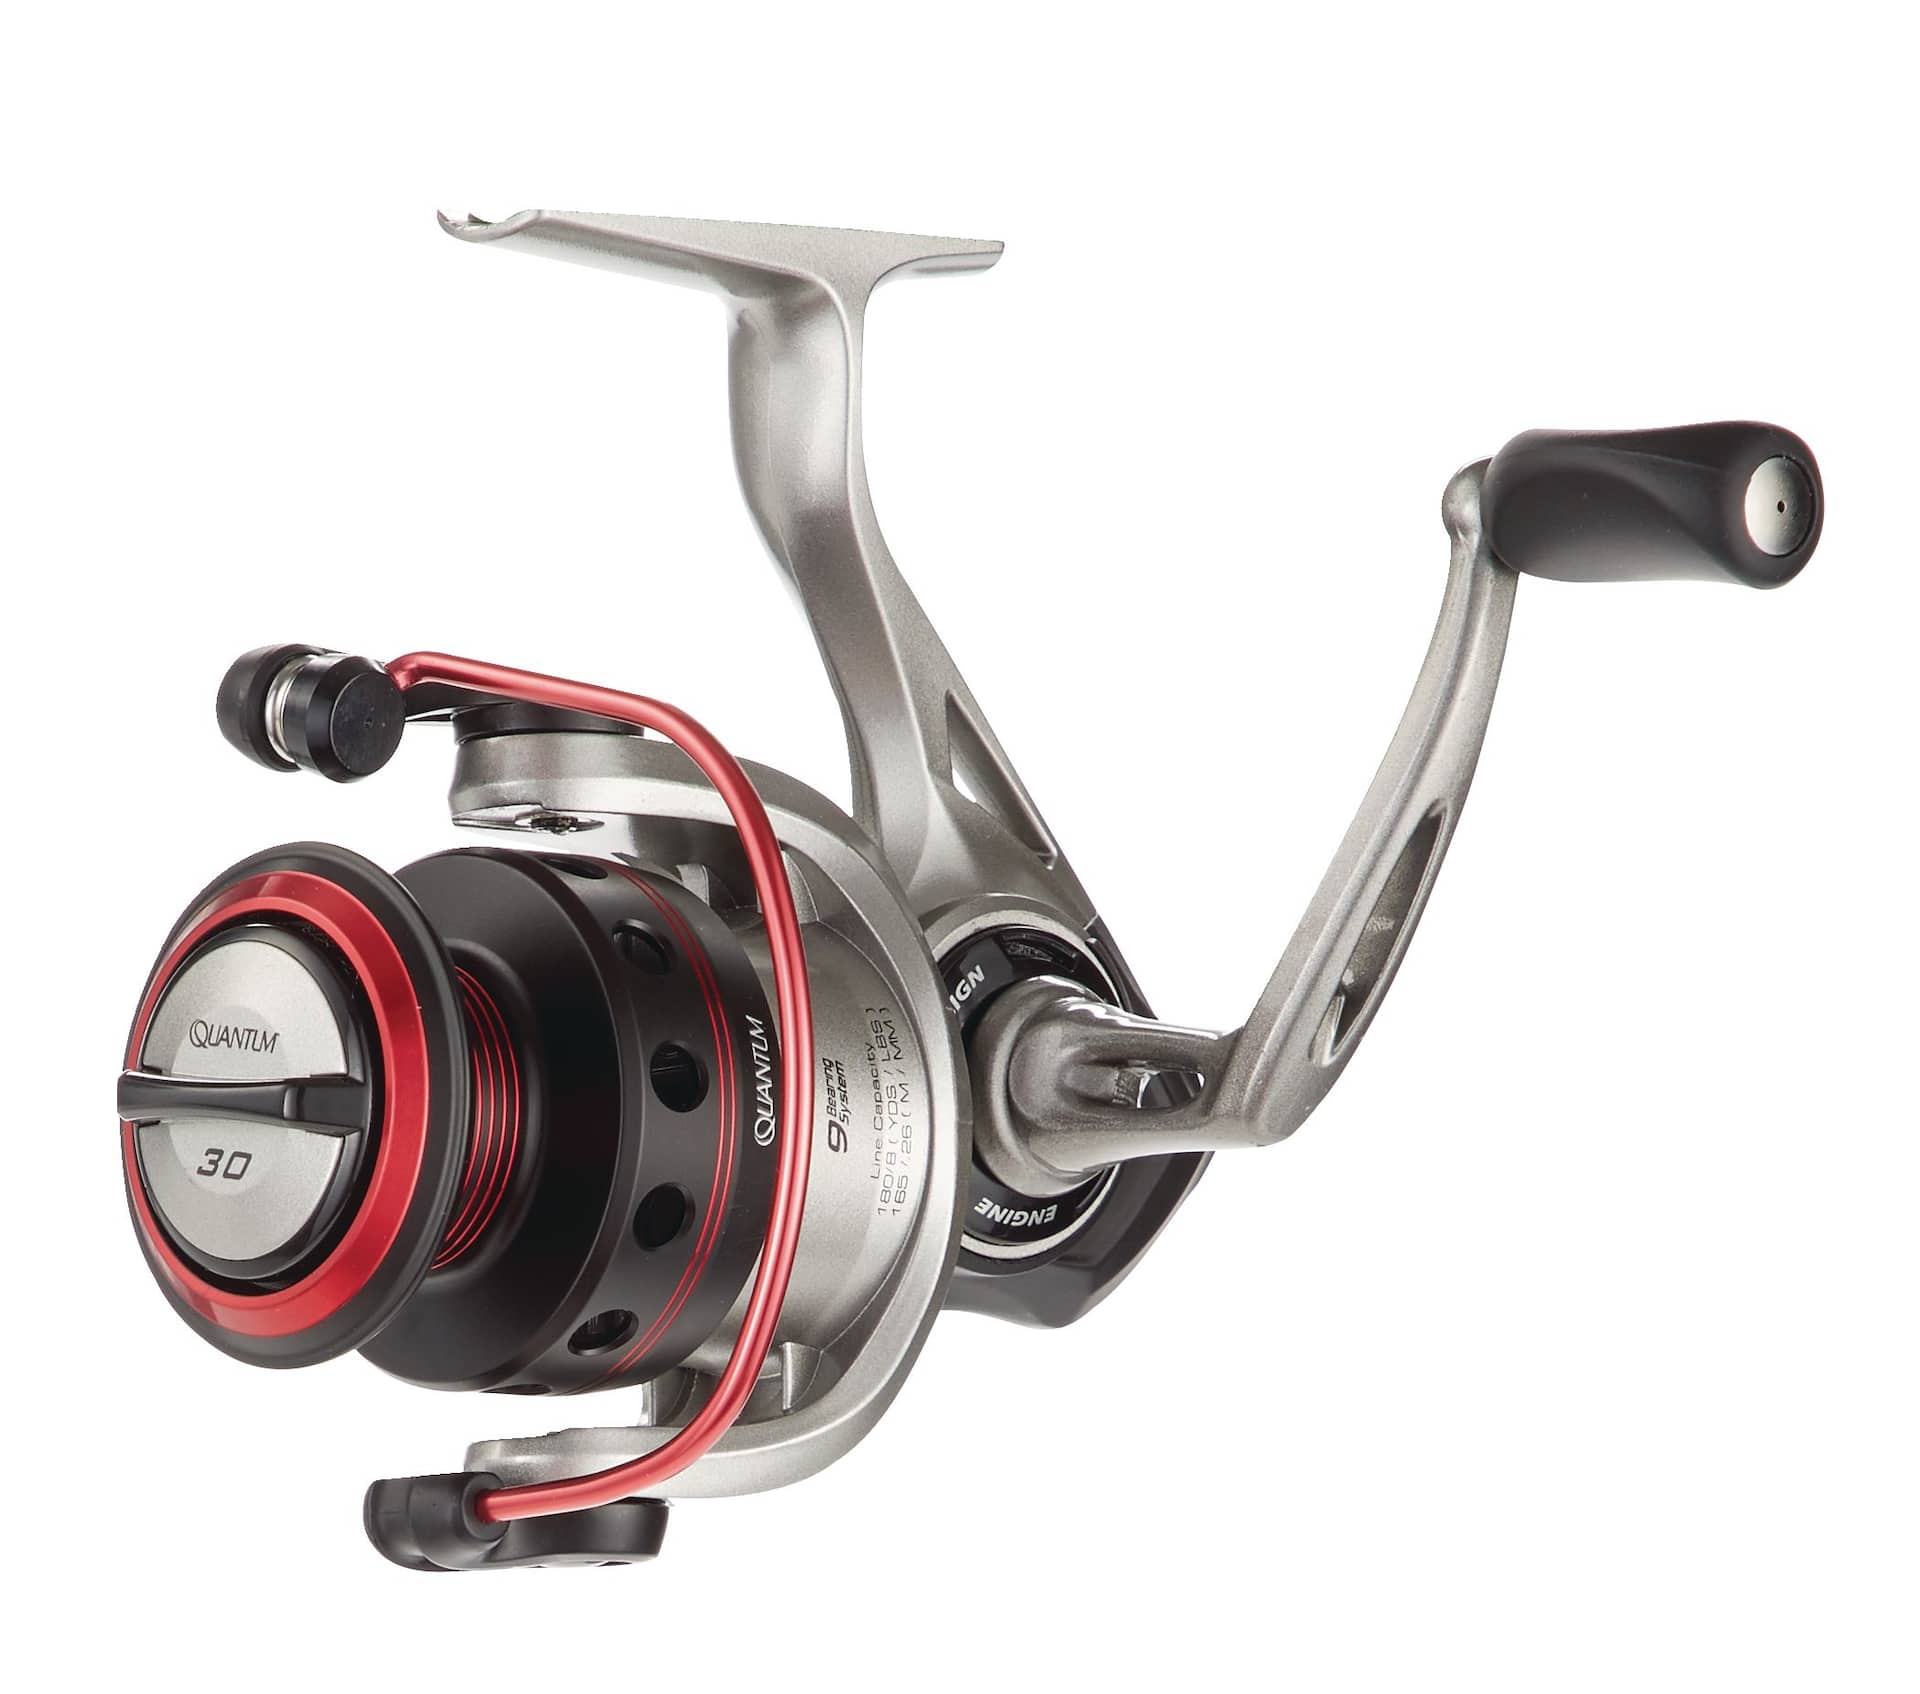 Quantum Accurist Spinning Fishing Reel, Size 25 Reel, White